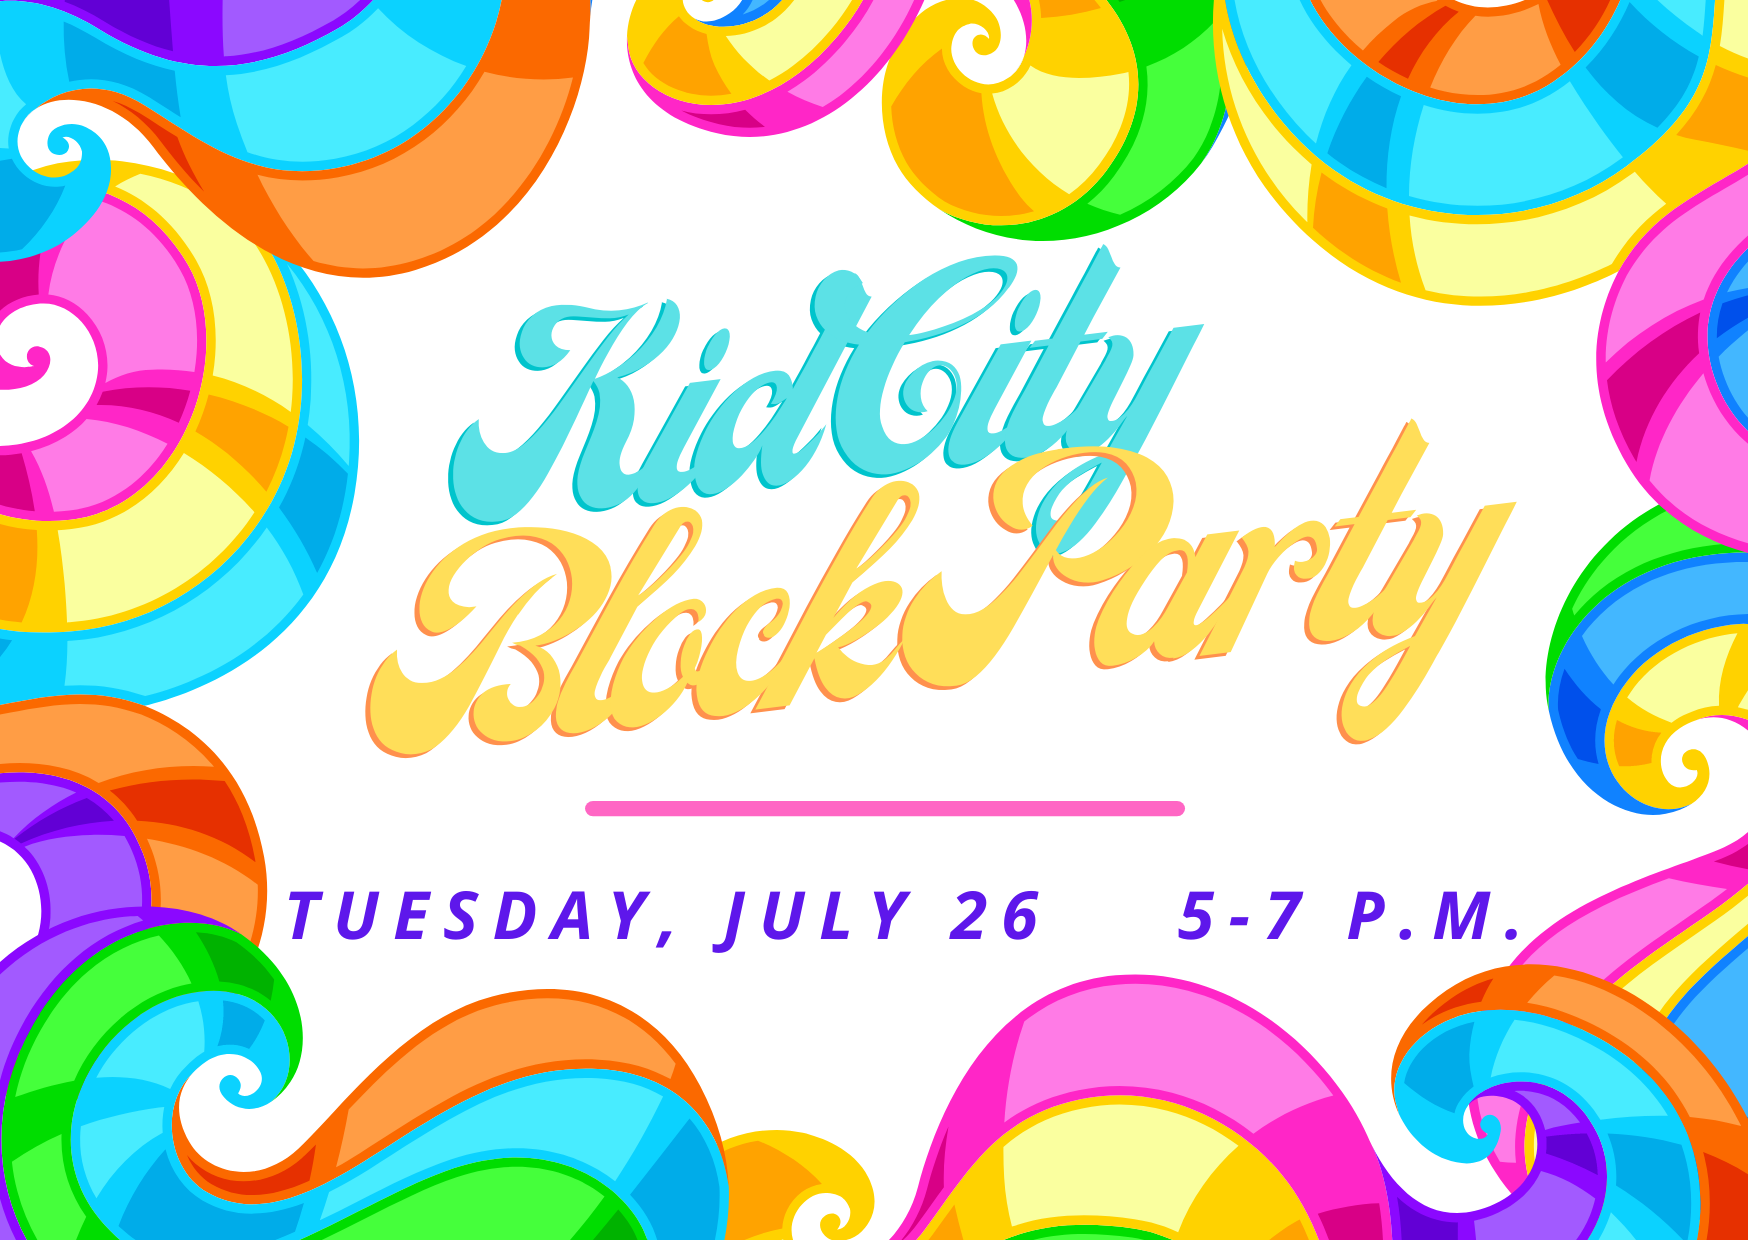 Christmas in July – Kid City Block Party